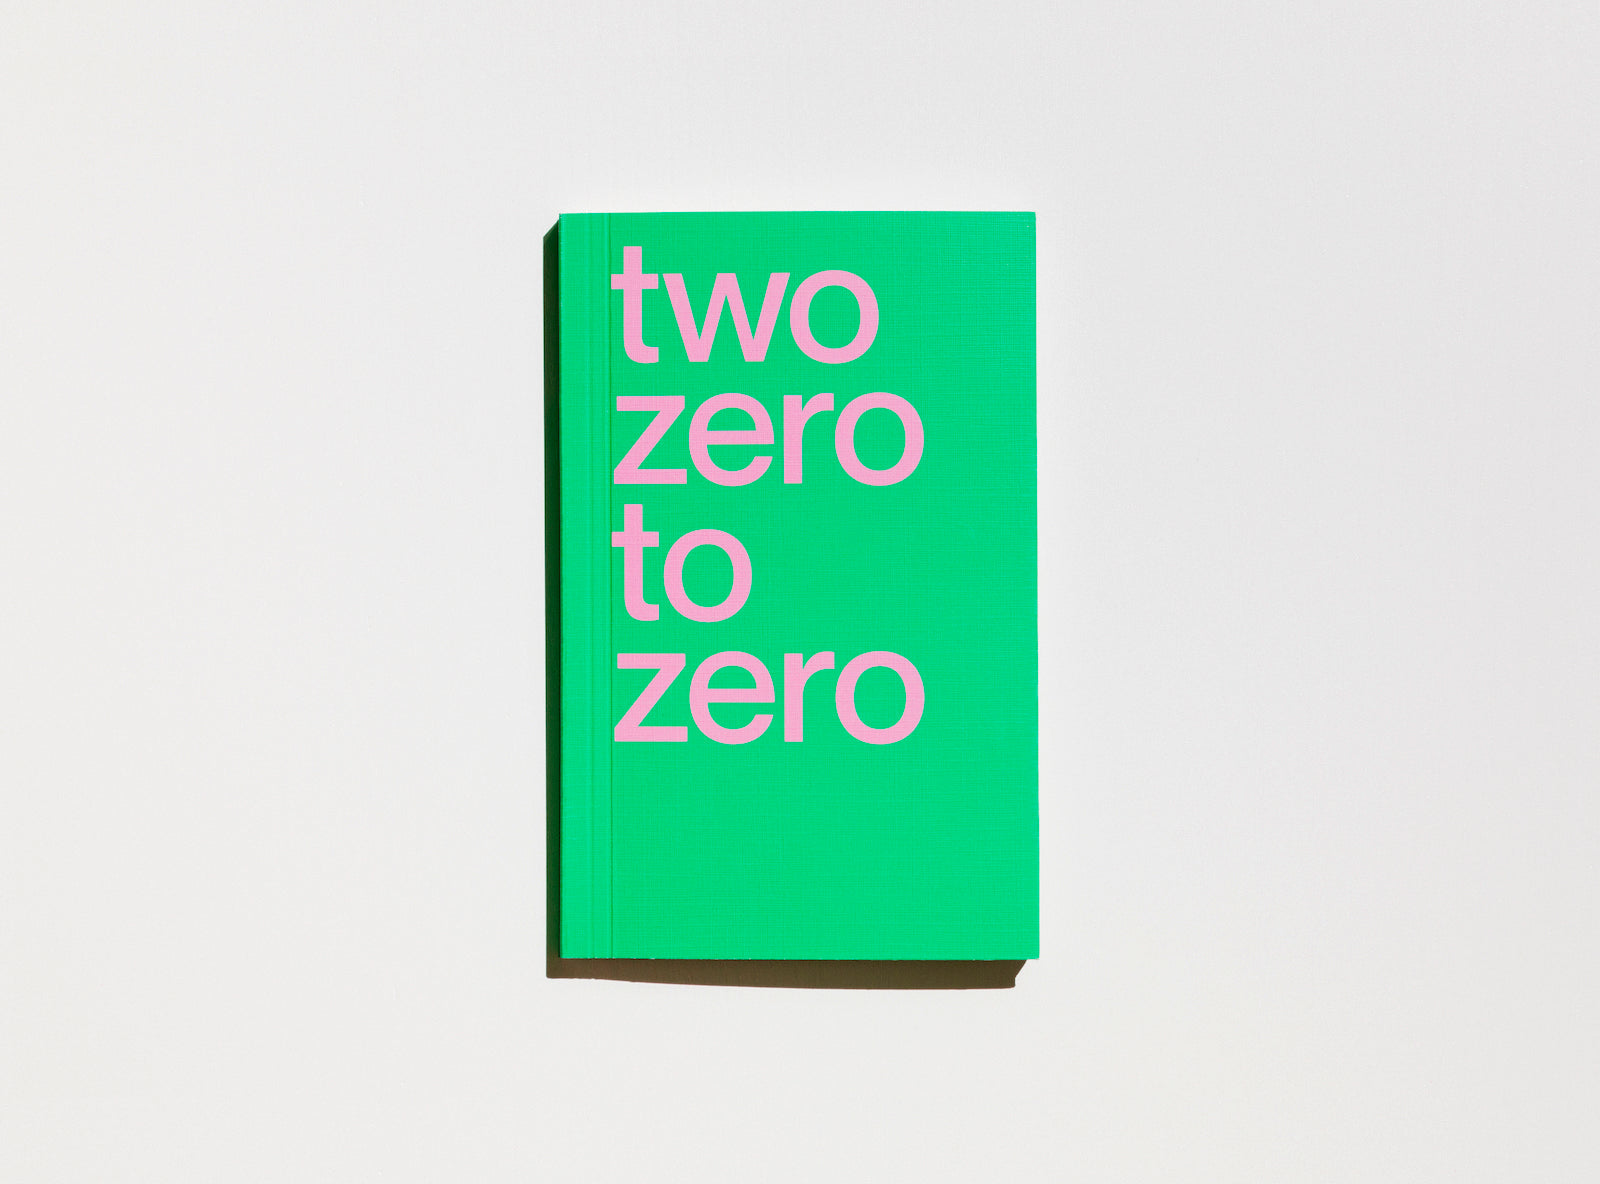 Cover of our 2020 planner which motto was two zero to zero, in pink and green.